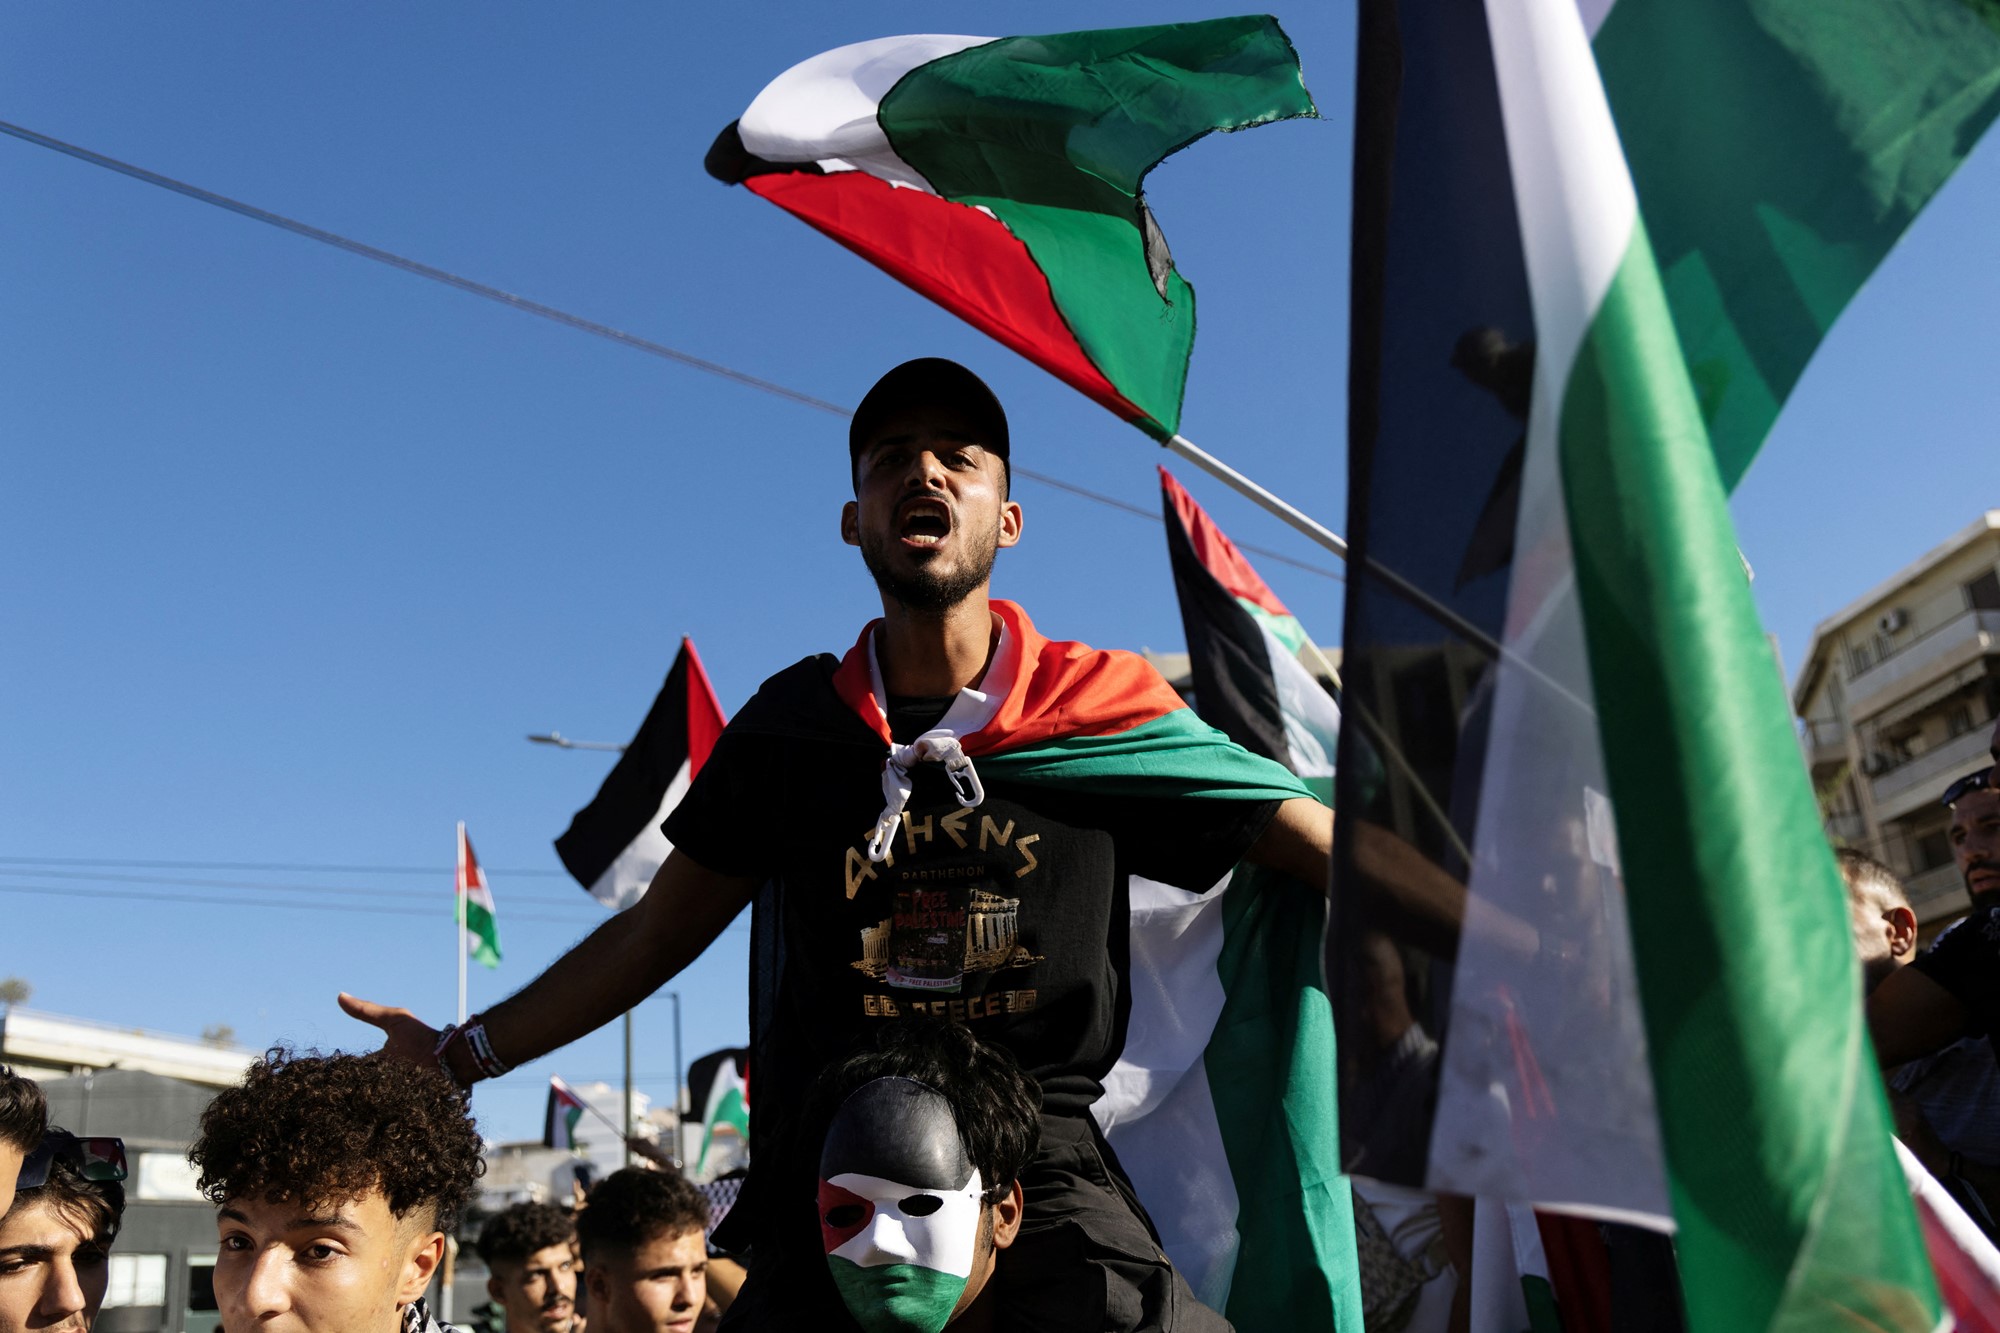 A man sits on another's soldiers with his arms spread wide, shouting with his mouth open. Palestinian flags are waved around him